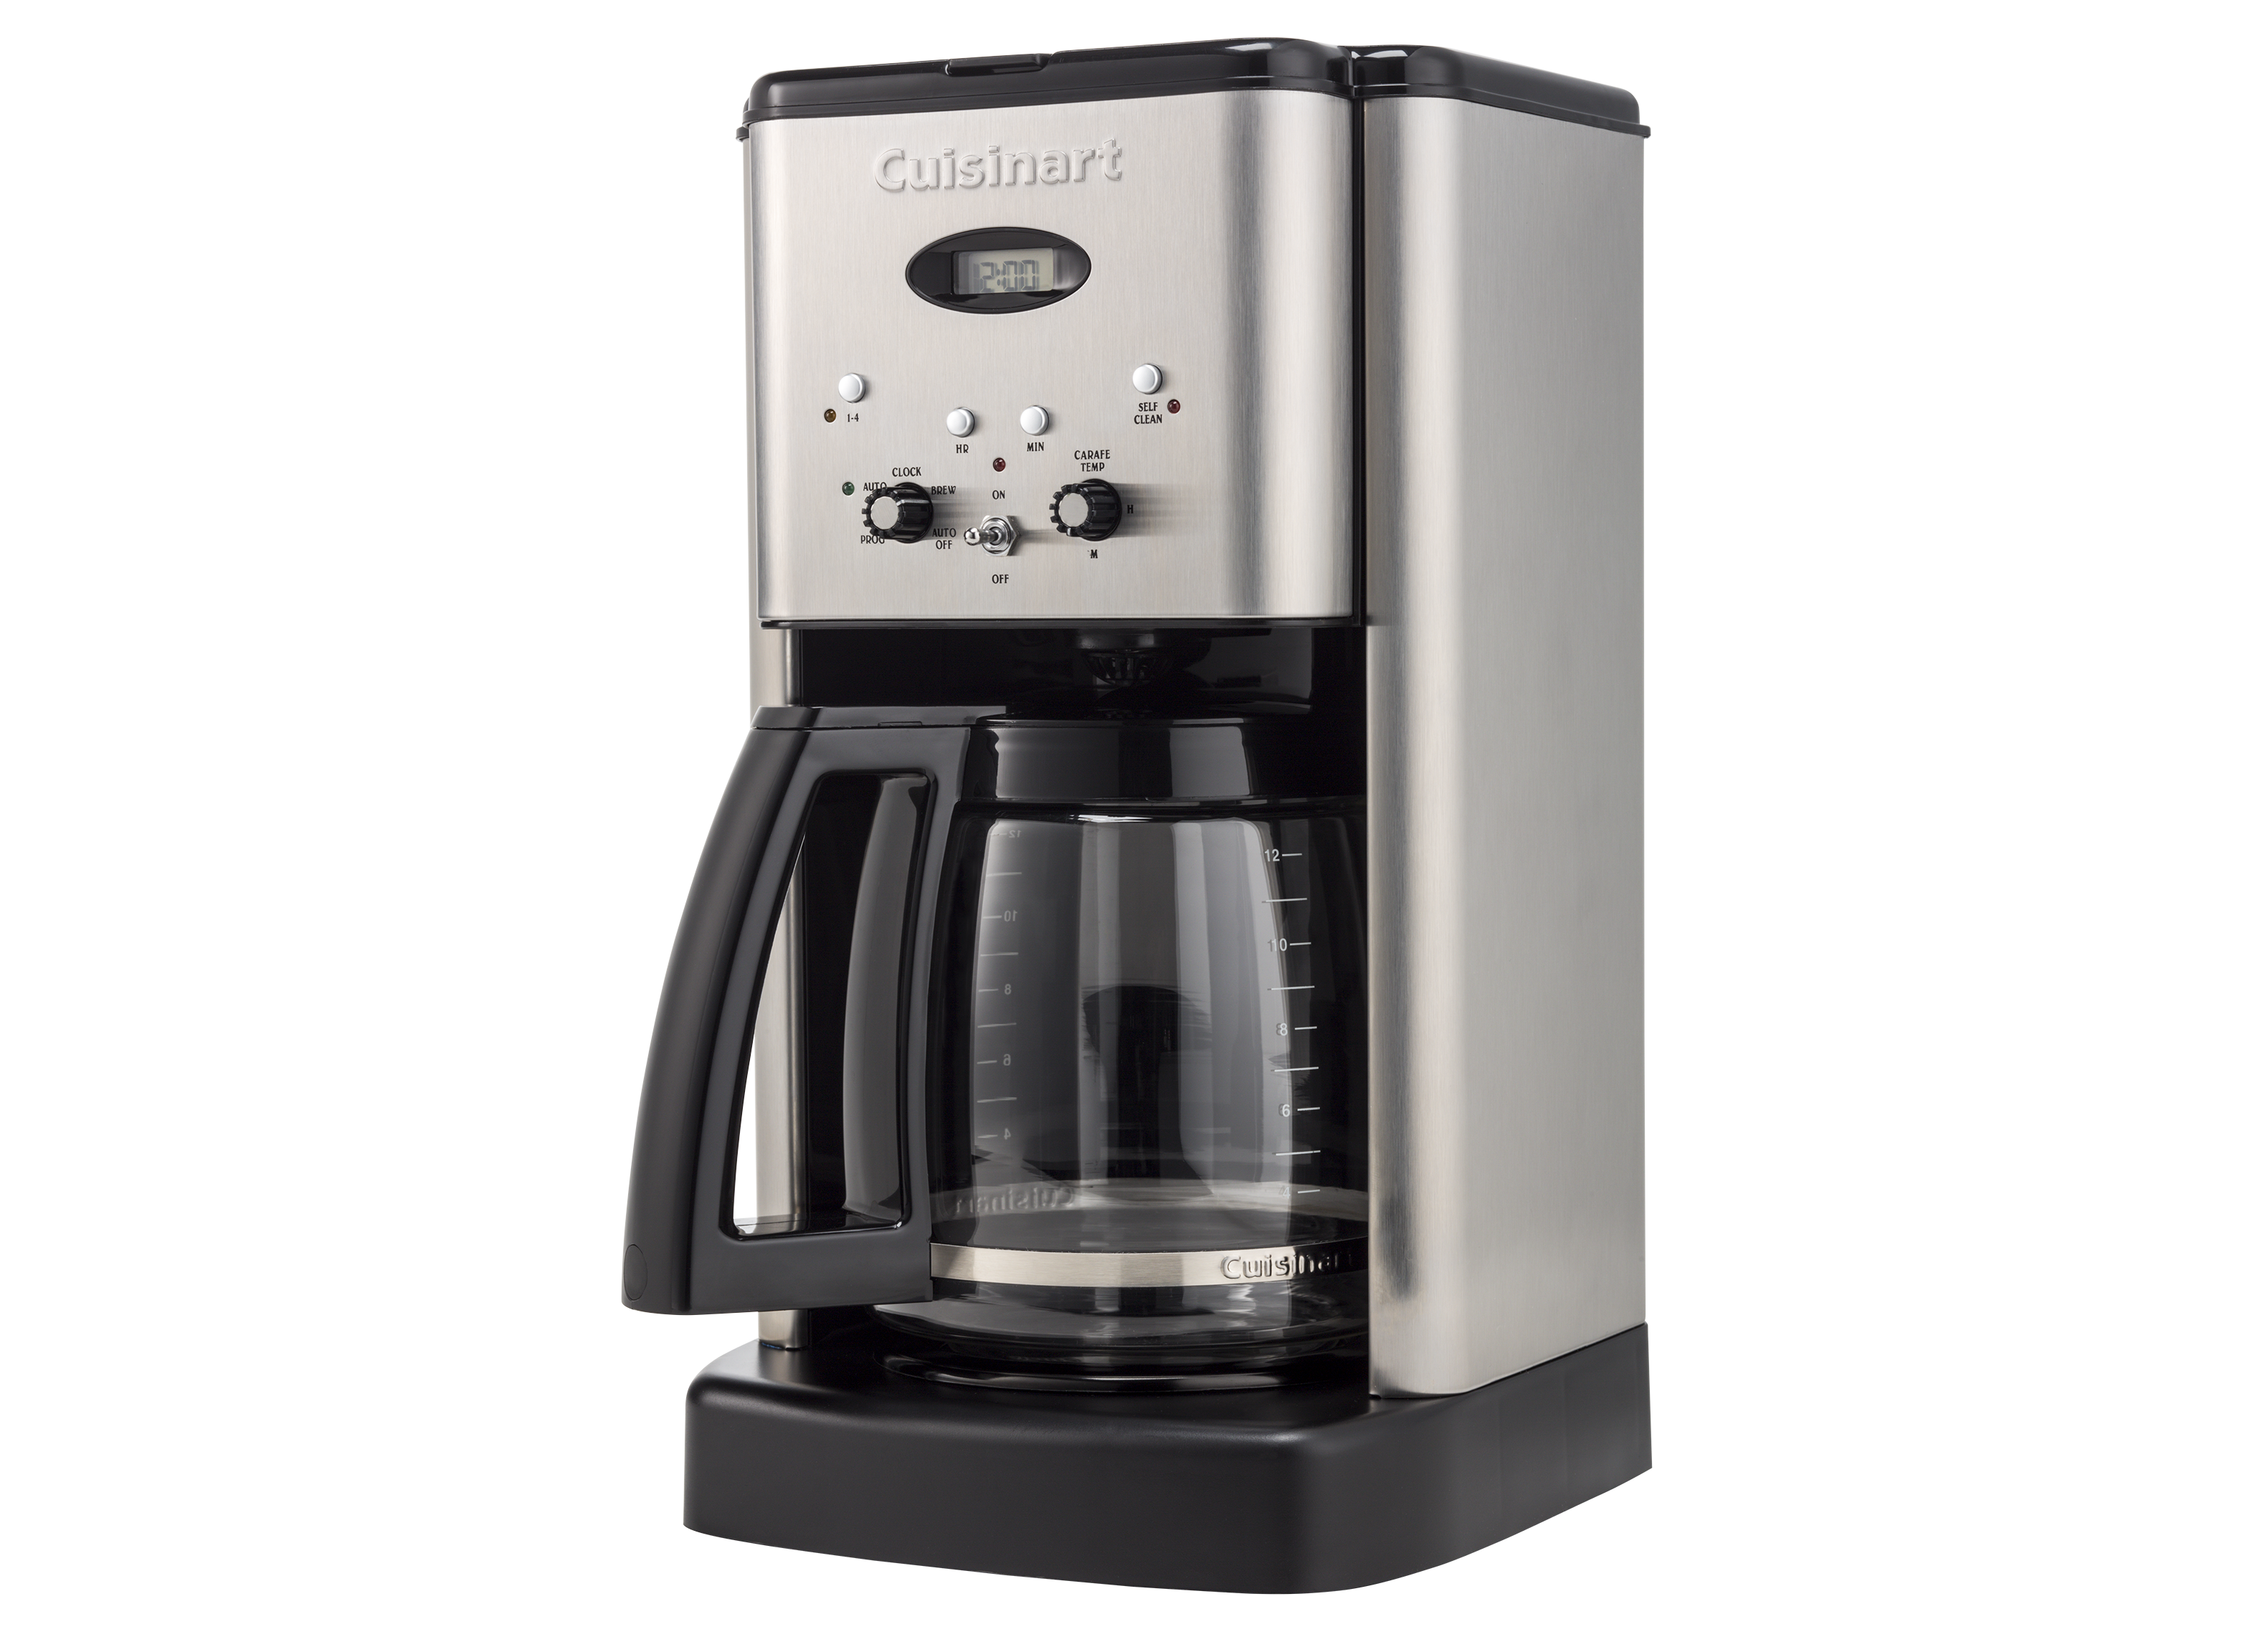 https://crdms.images.consumerreports.org/prod/products/cr/models/114899-coffeemakers-cuisinart-brewcentraldcc1200.png